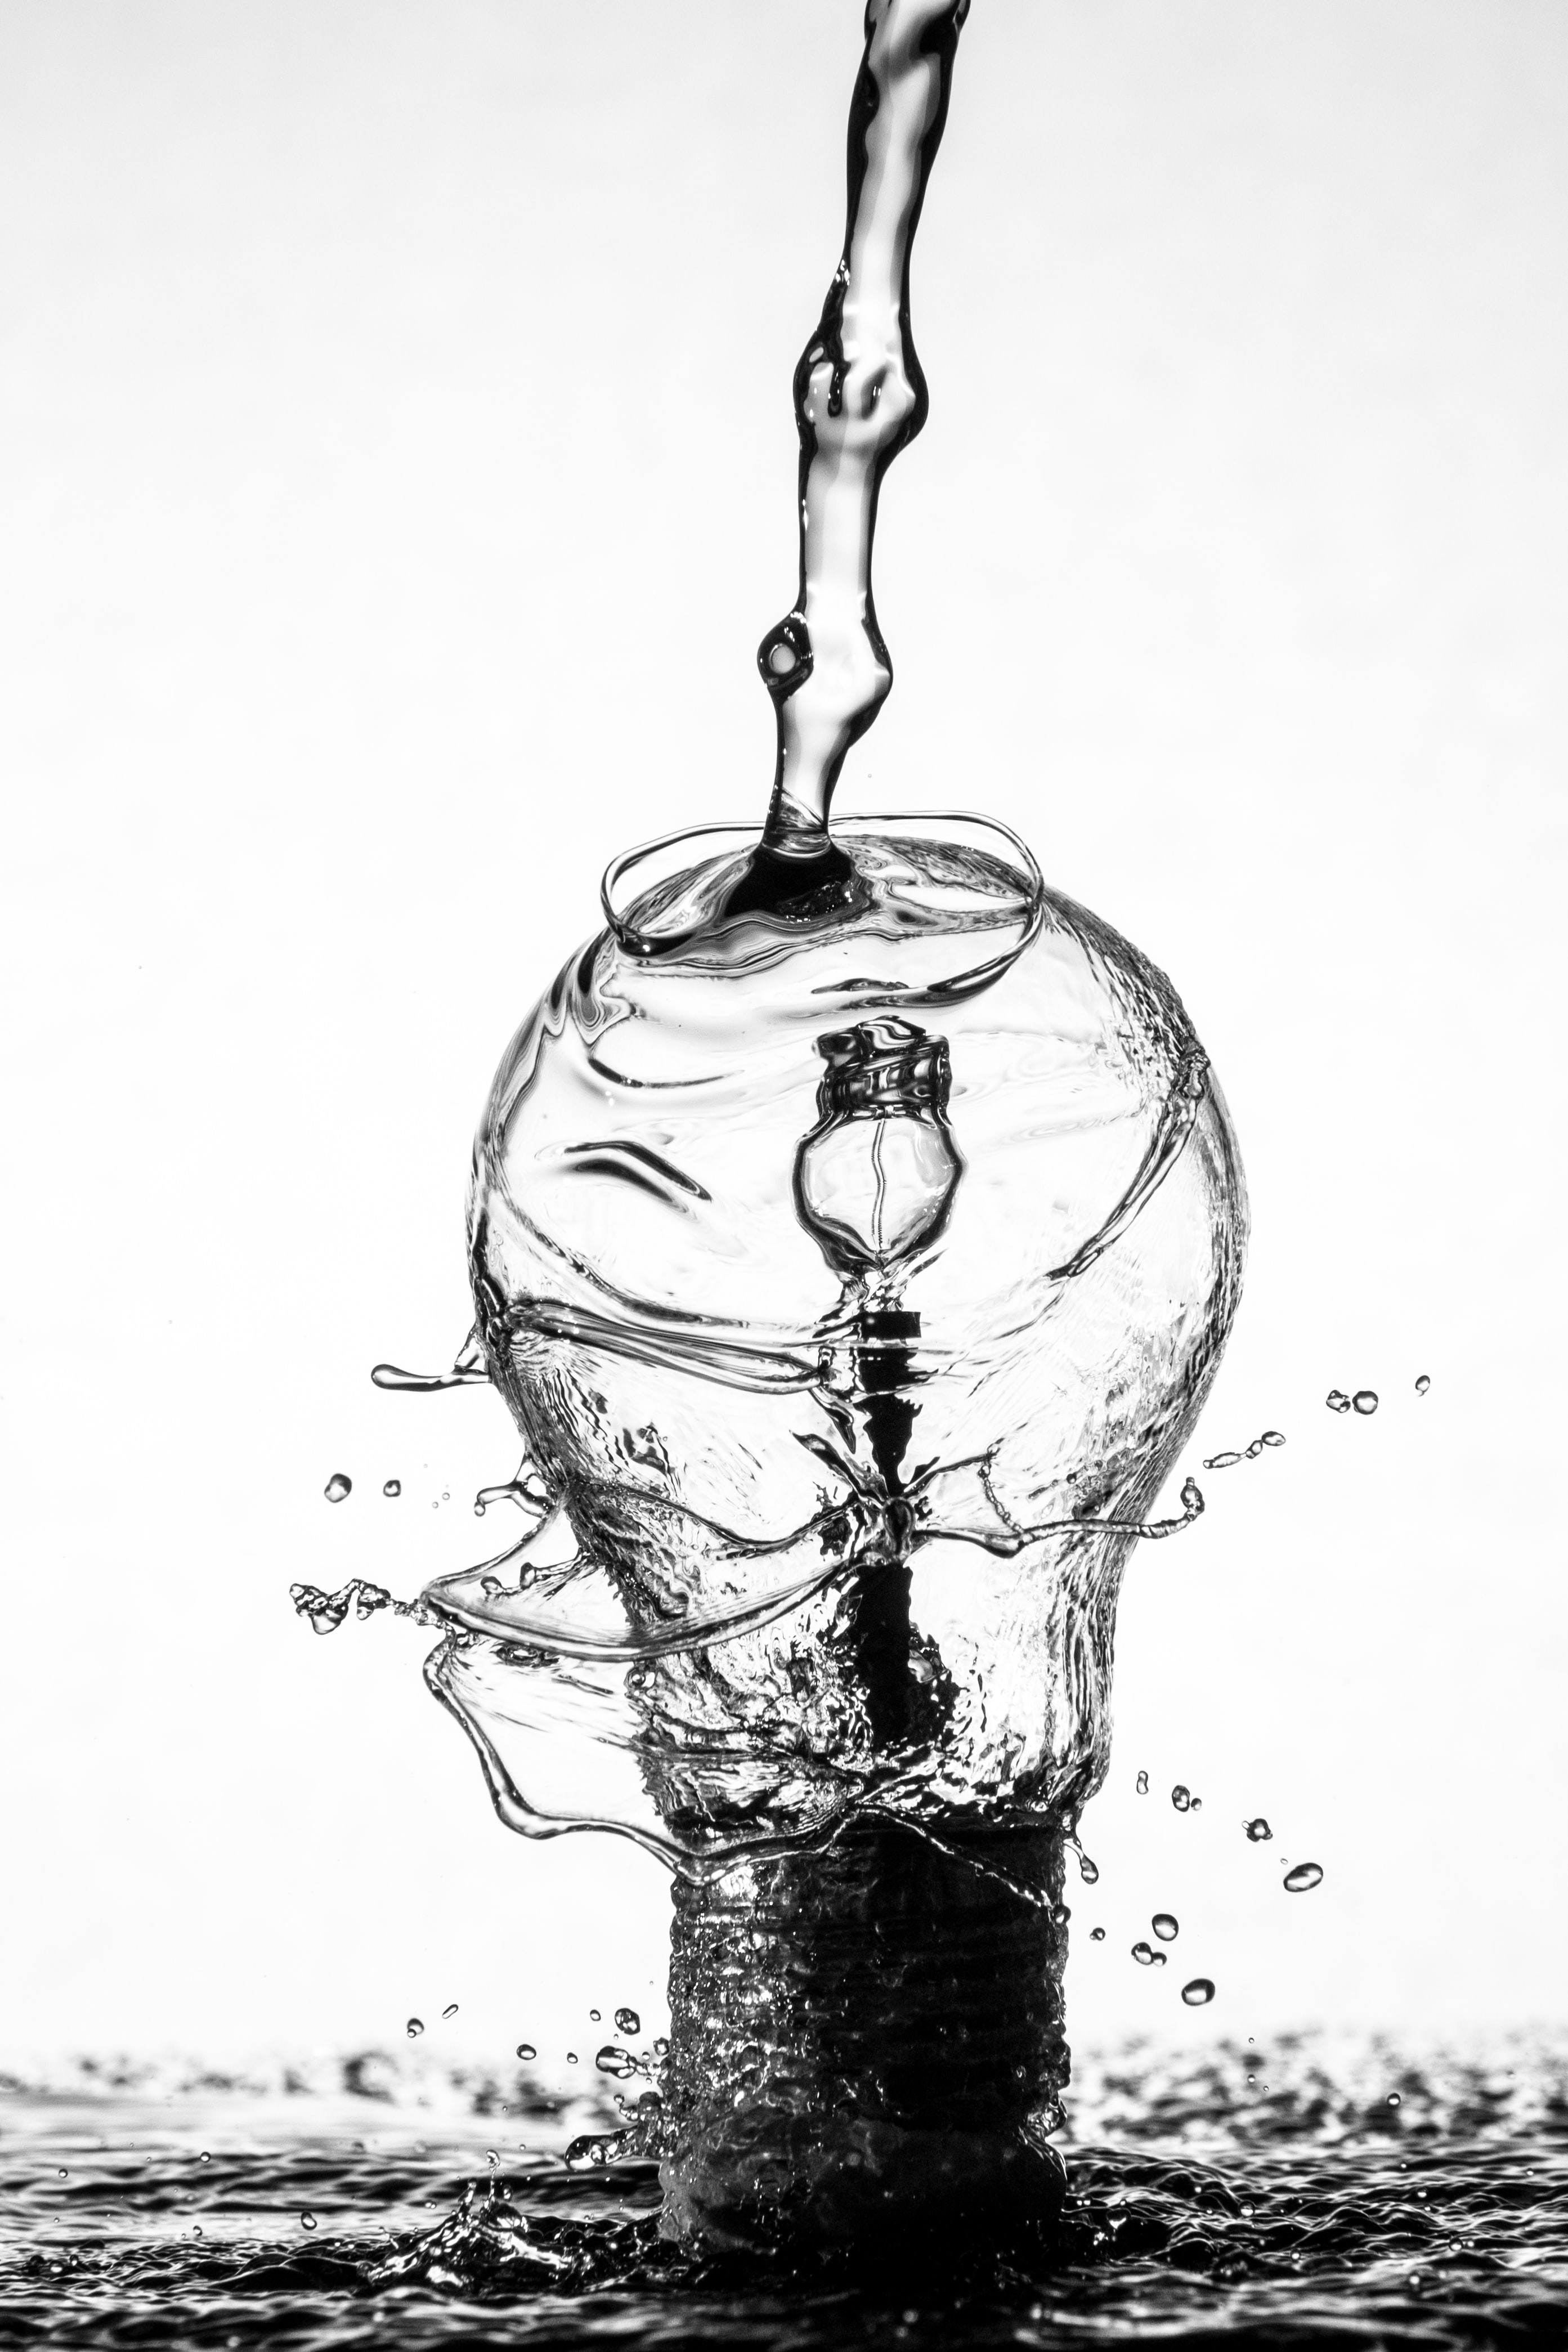 Water pouring over a light bulb; image by Sharon Pittaway, via Unsplash.com.